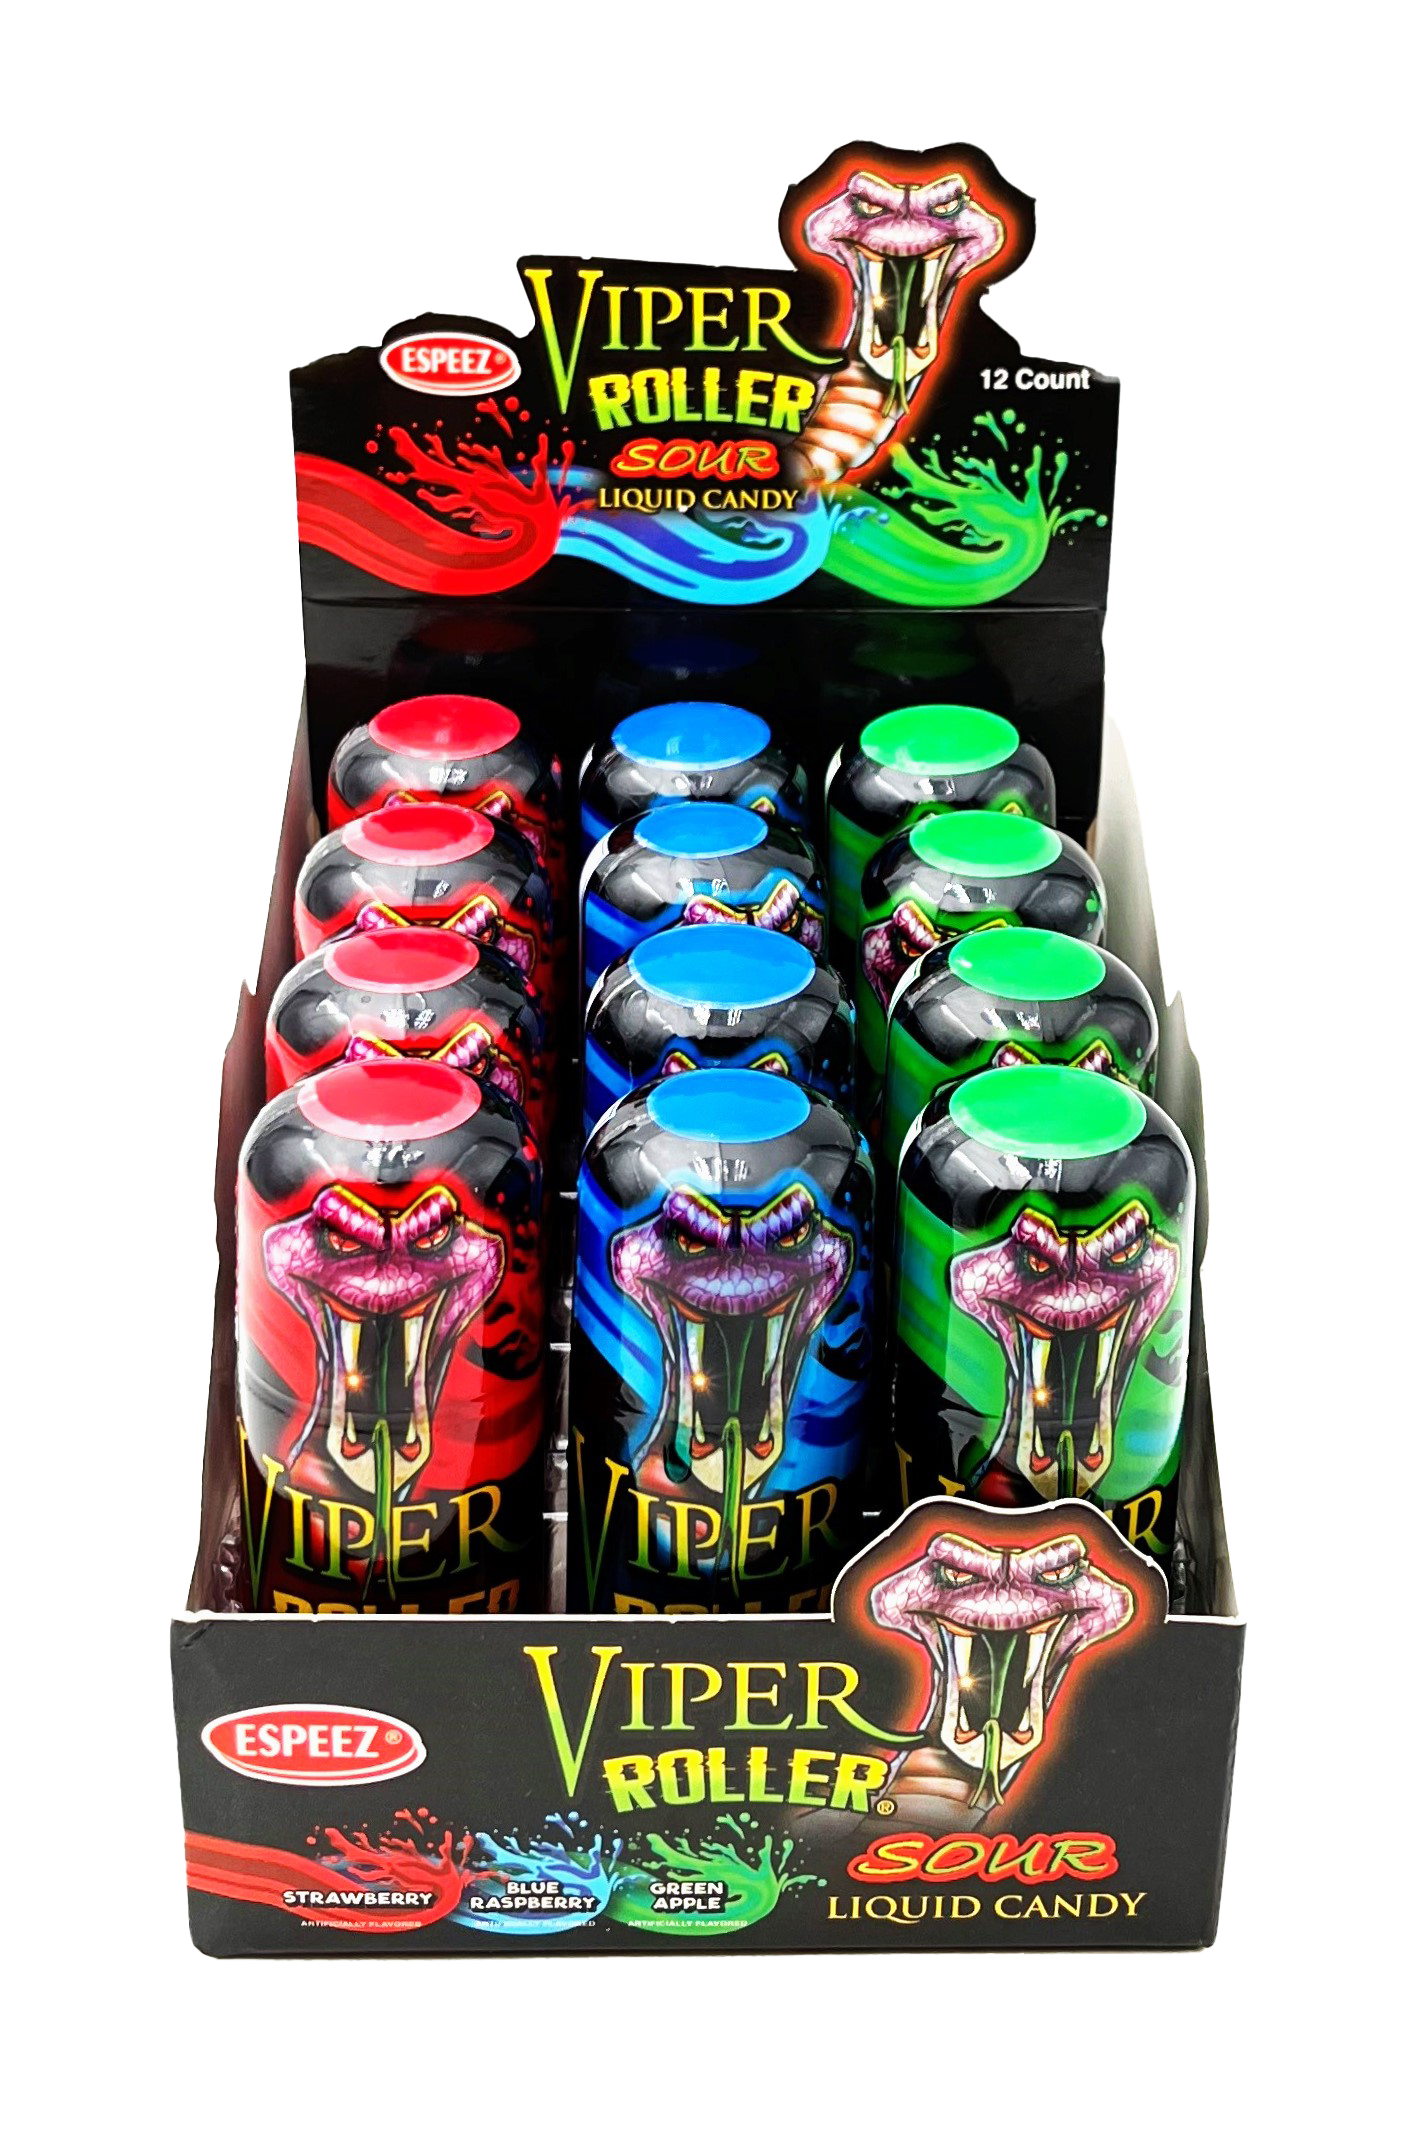 Viper Roller Sour Liquid Candy, Sour Candy